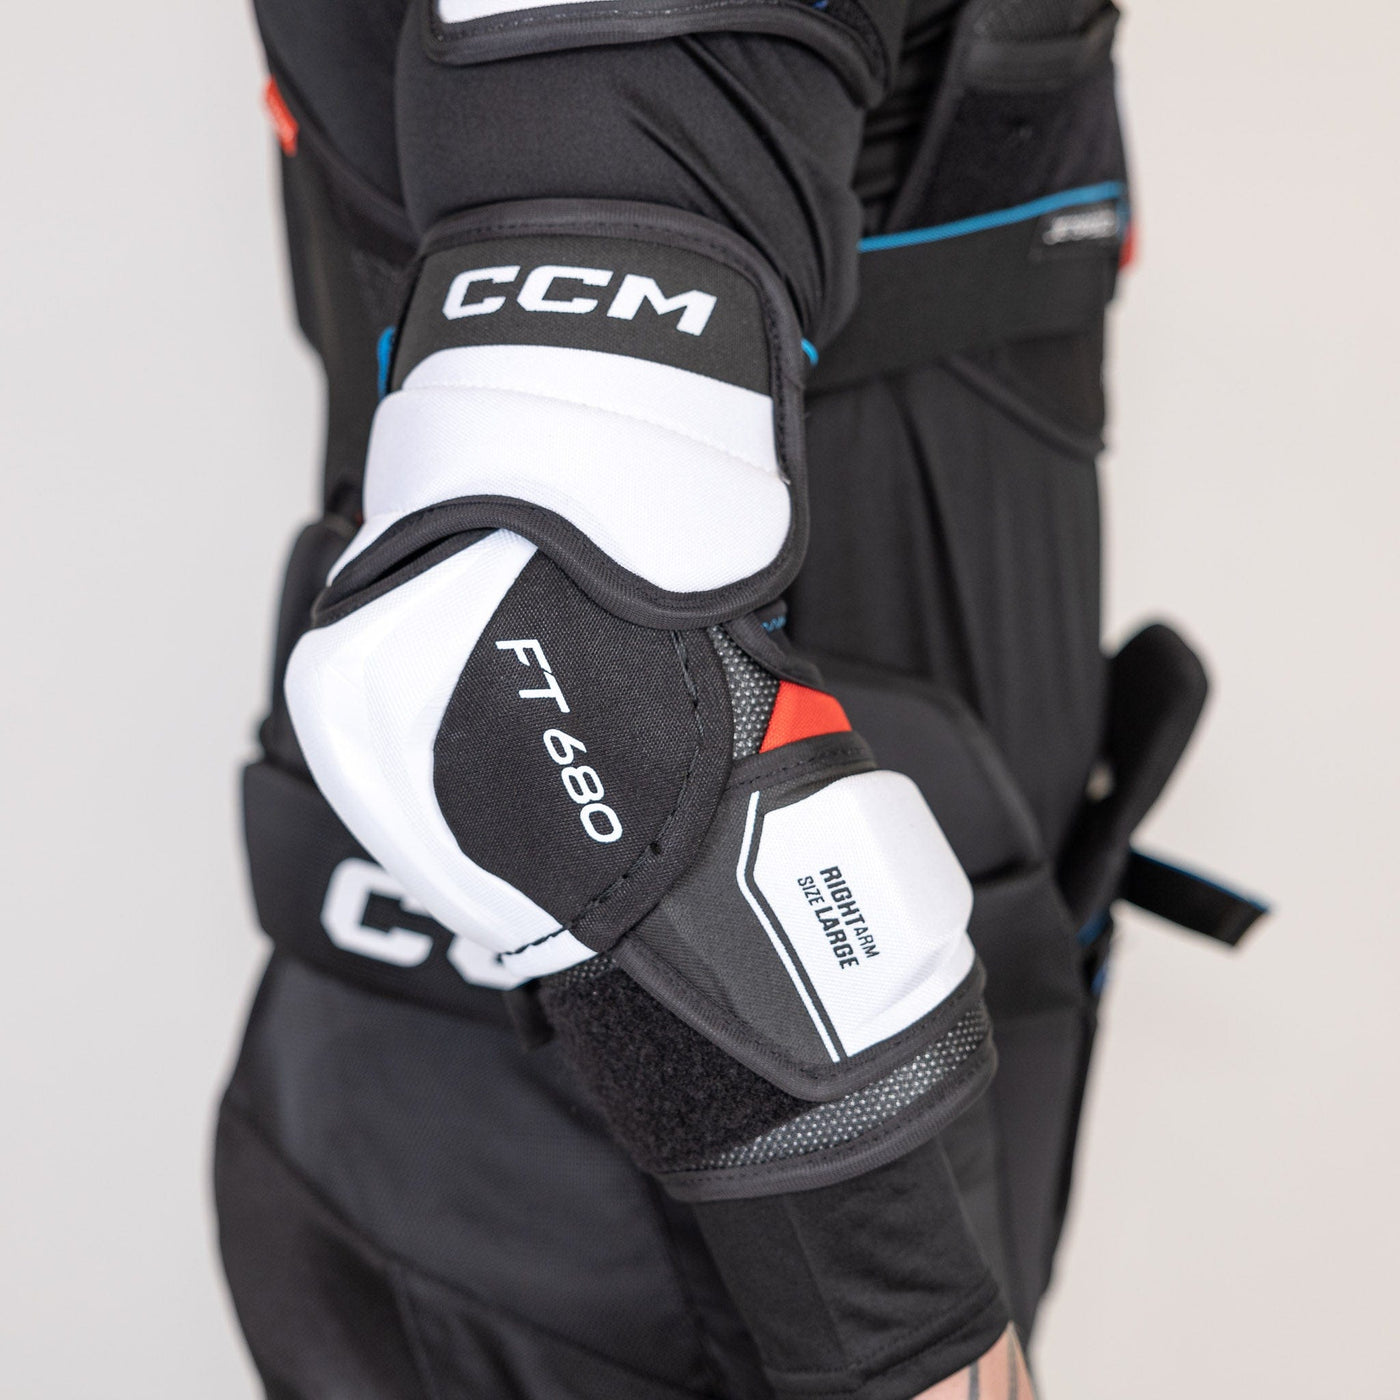 CCM Jetspeed FT680 Junior Hockey Elbow Pads - The Hockey Shop Source For Sports